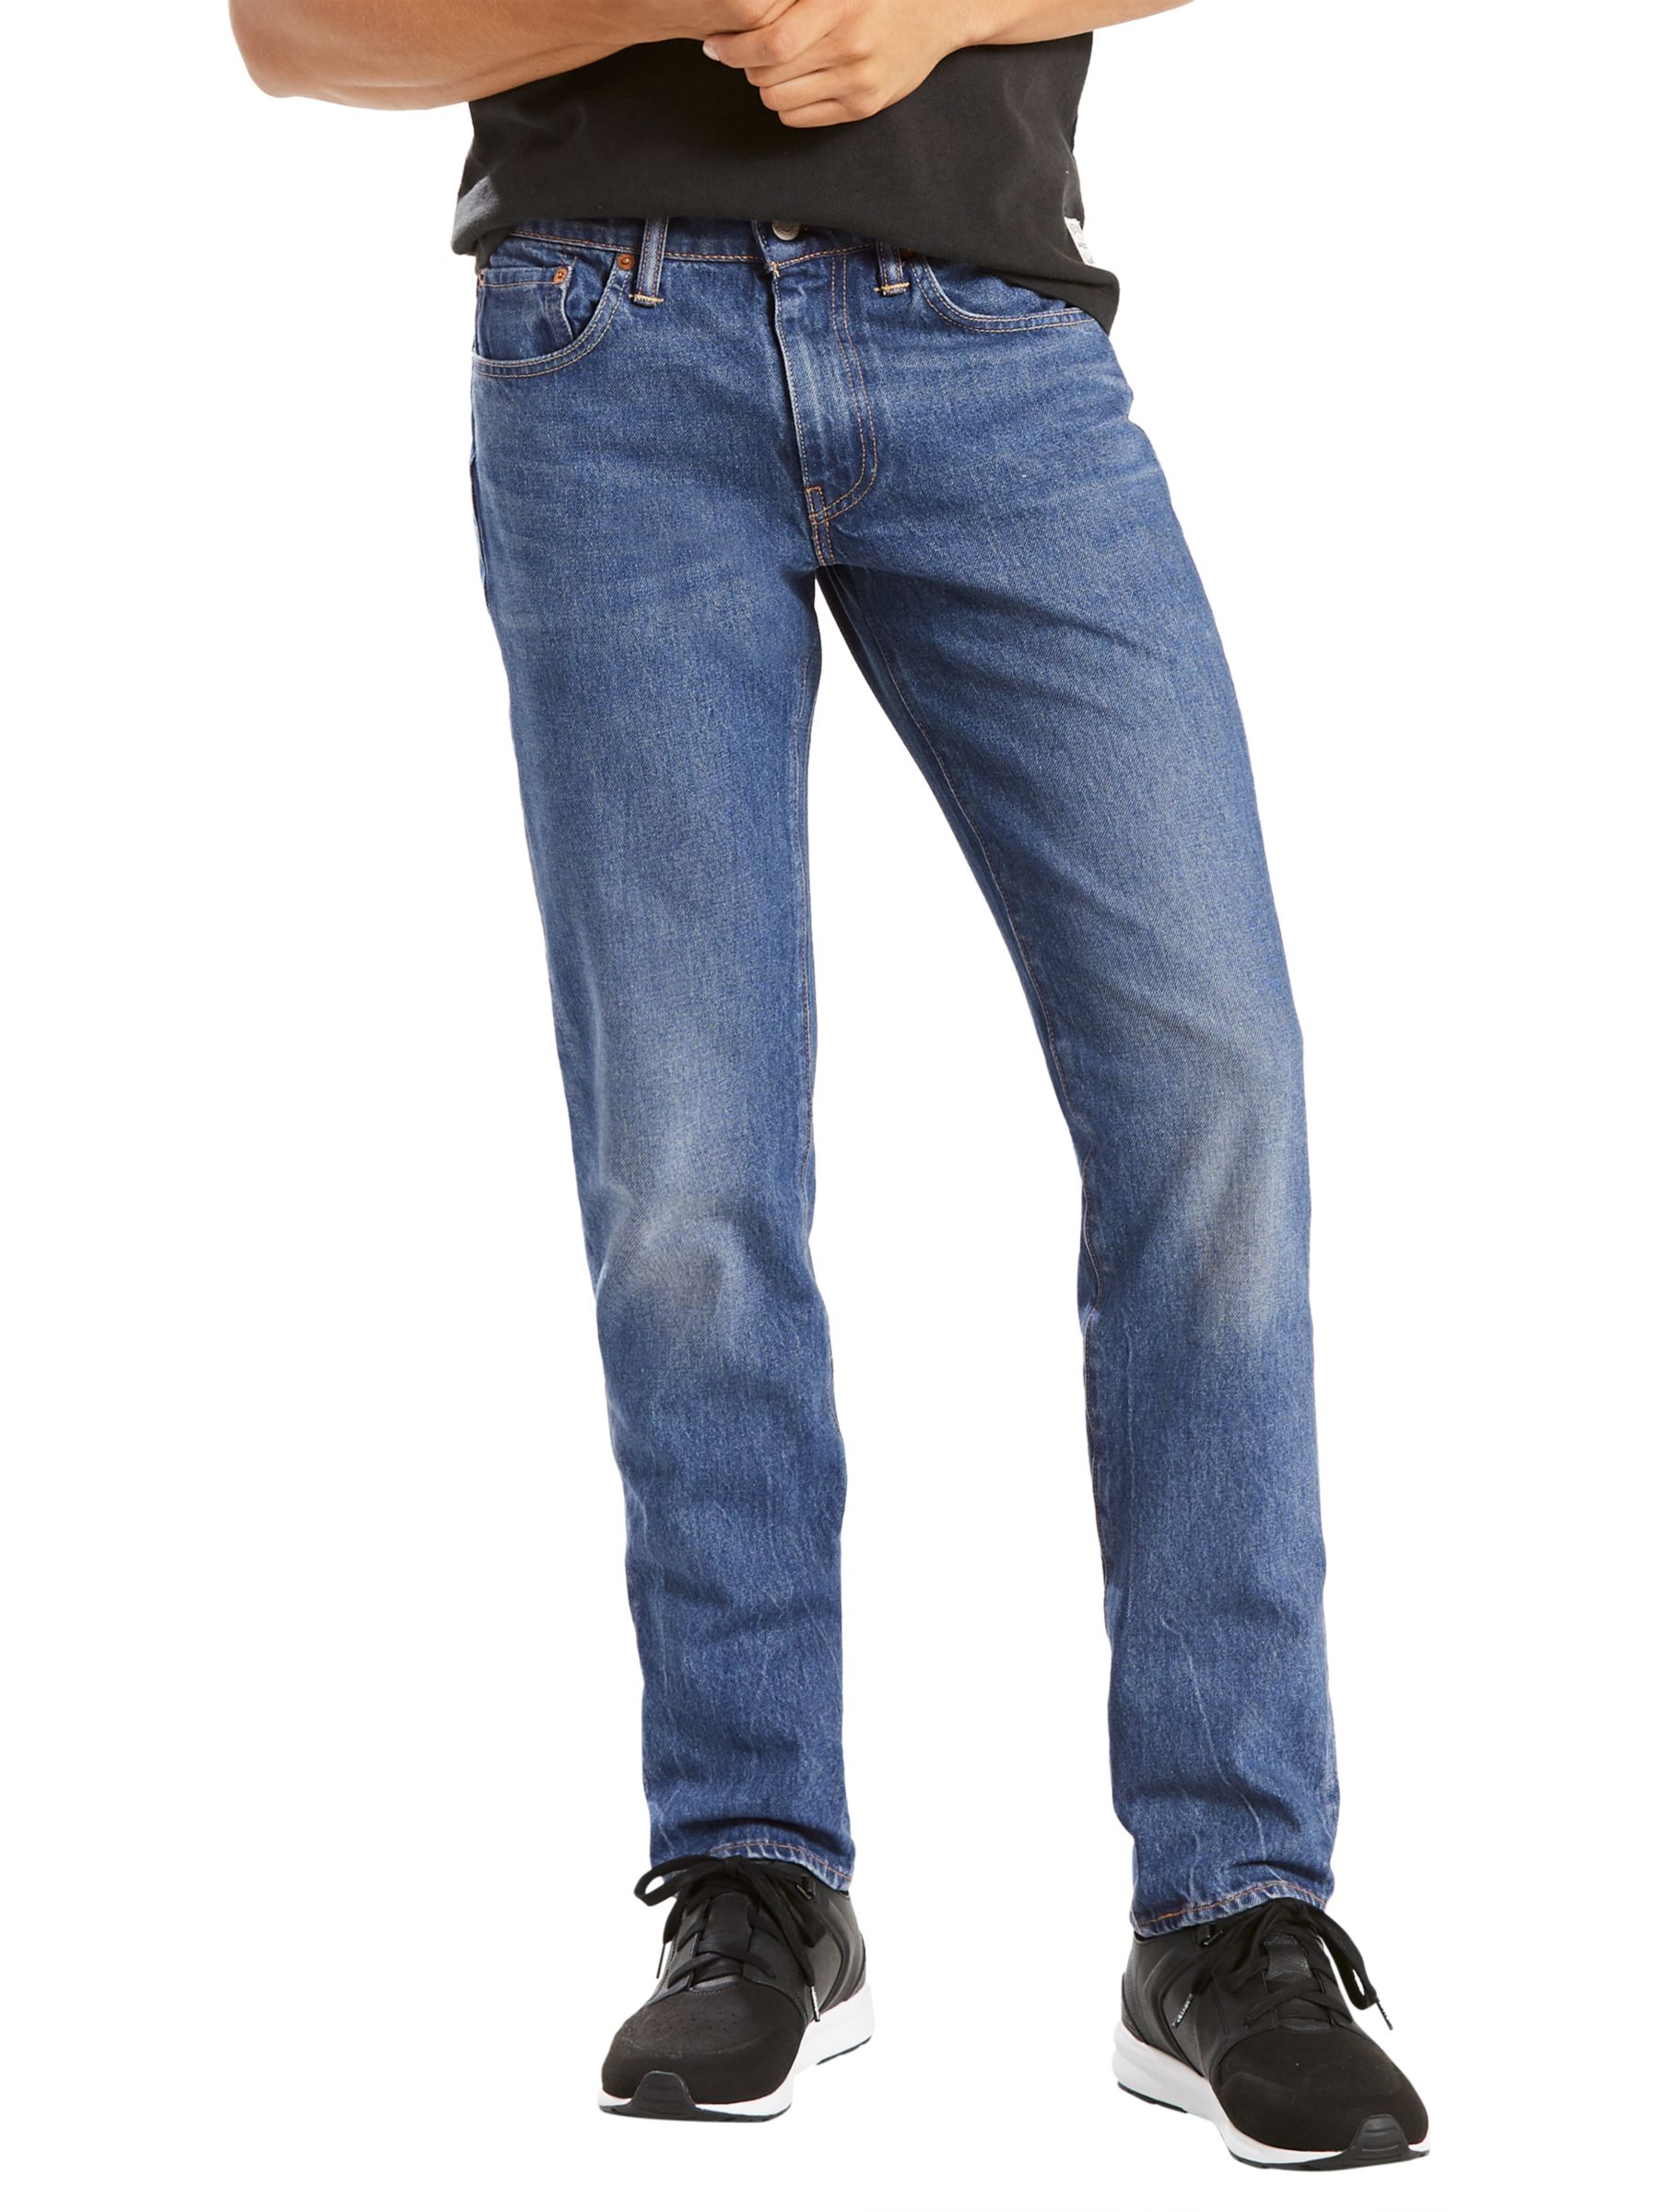 Levi's 511 Slim Fit Jeans, Mid City at 